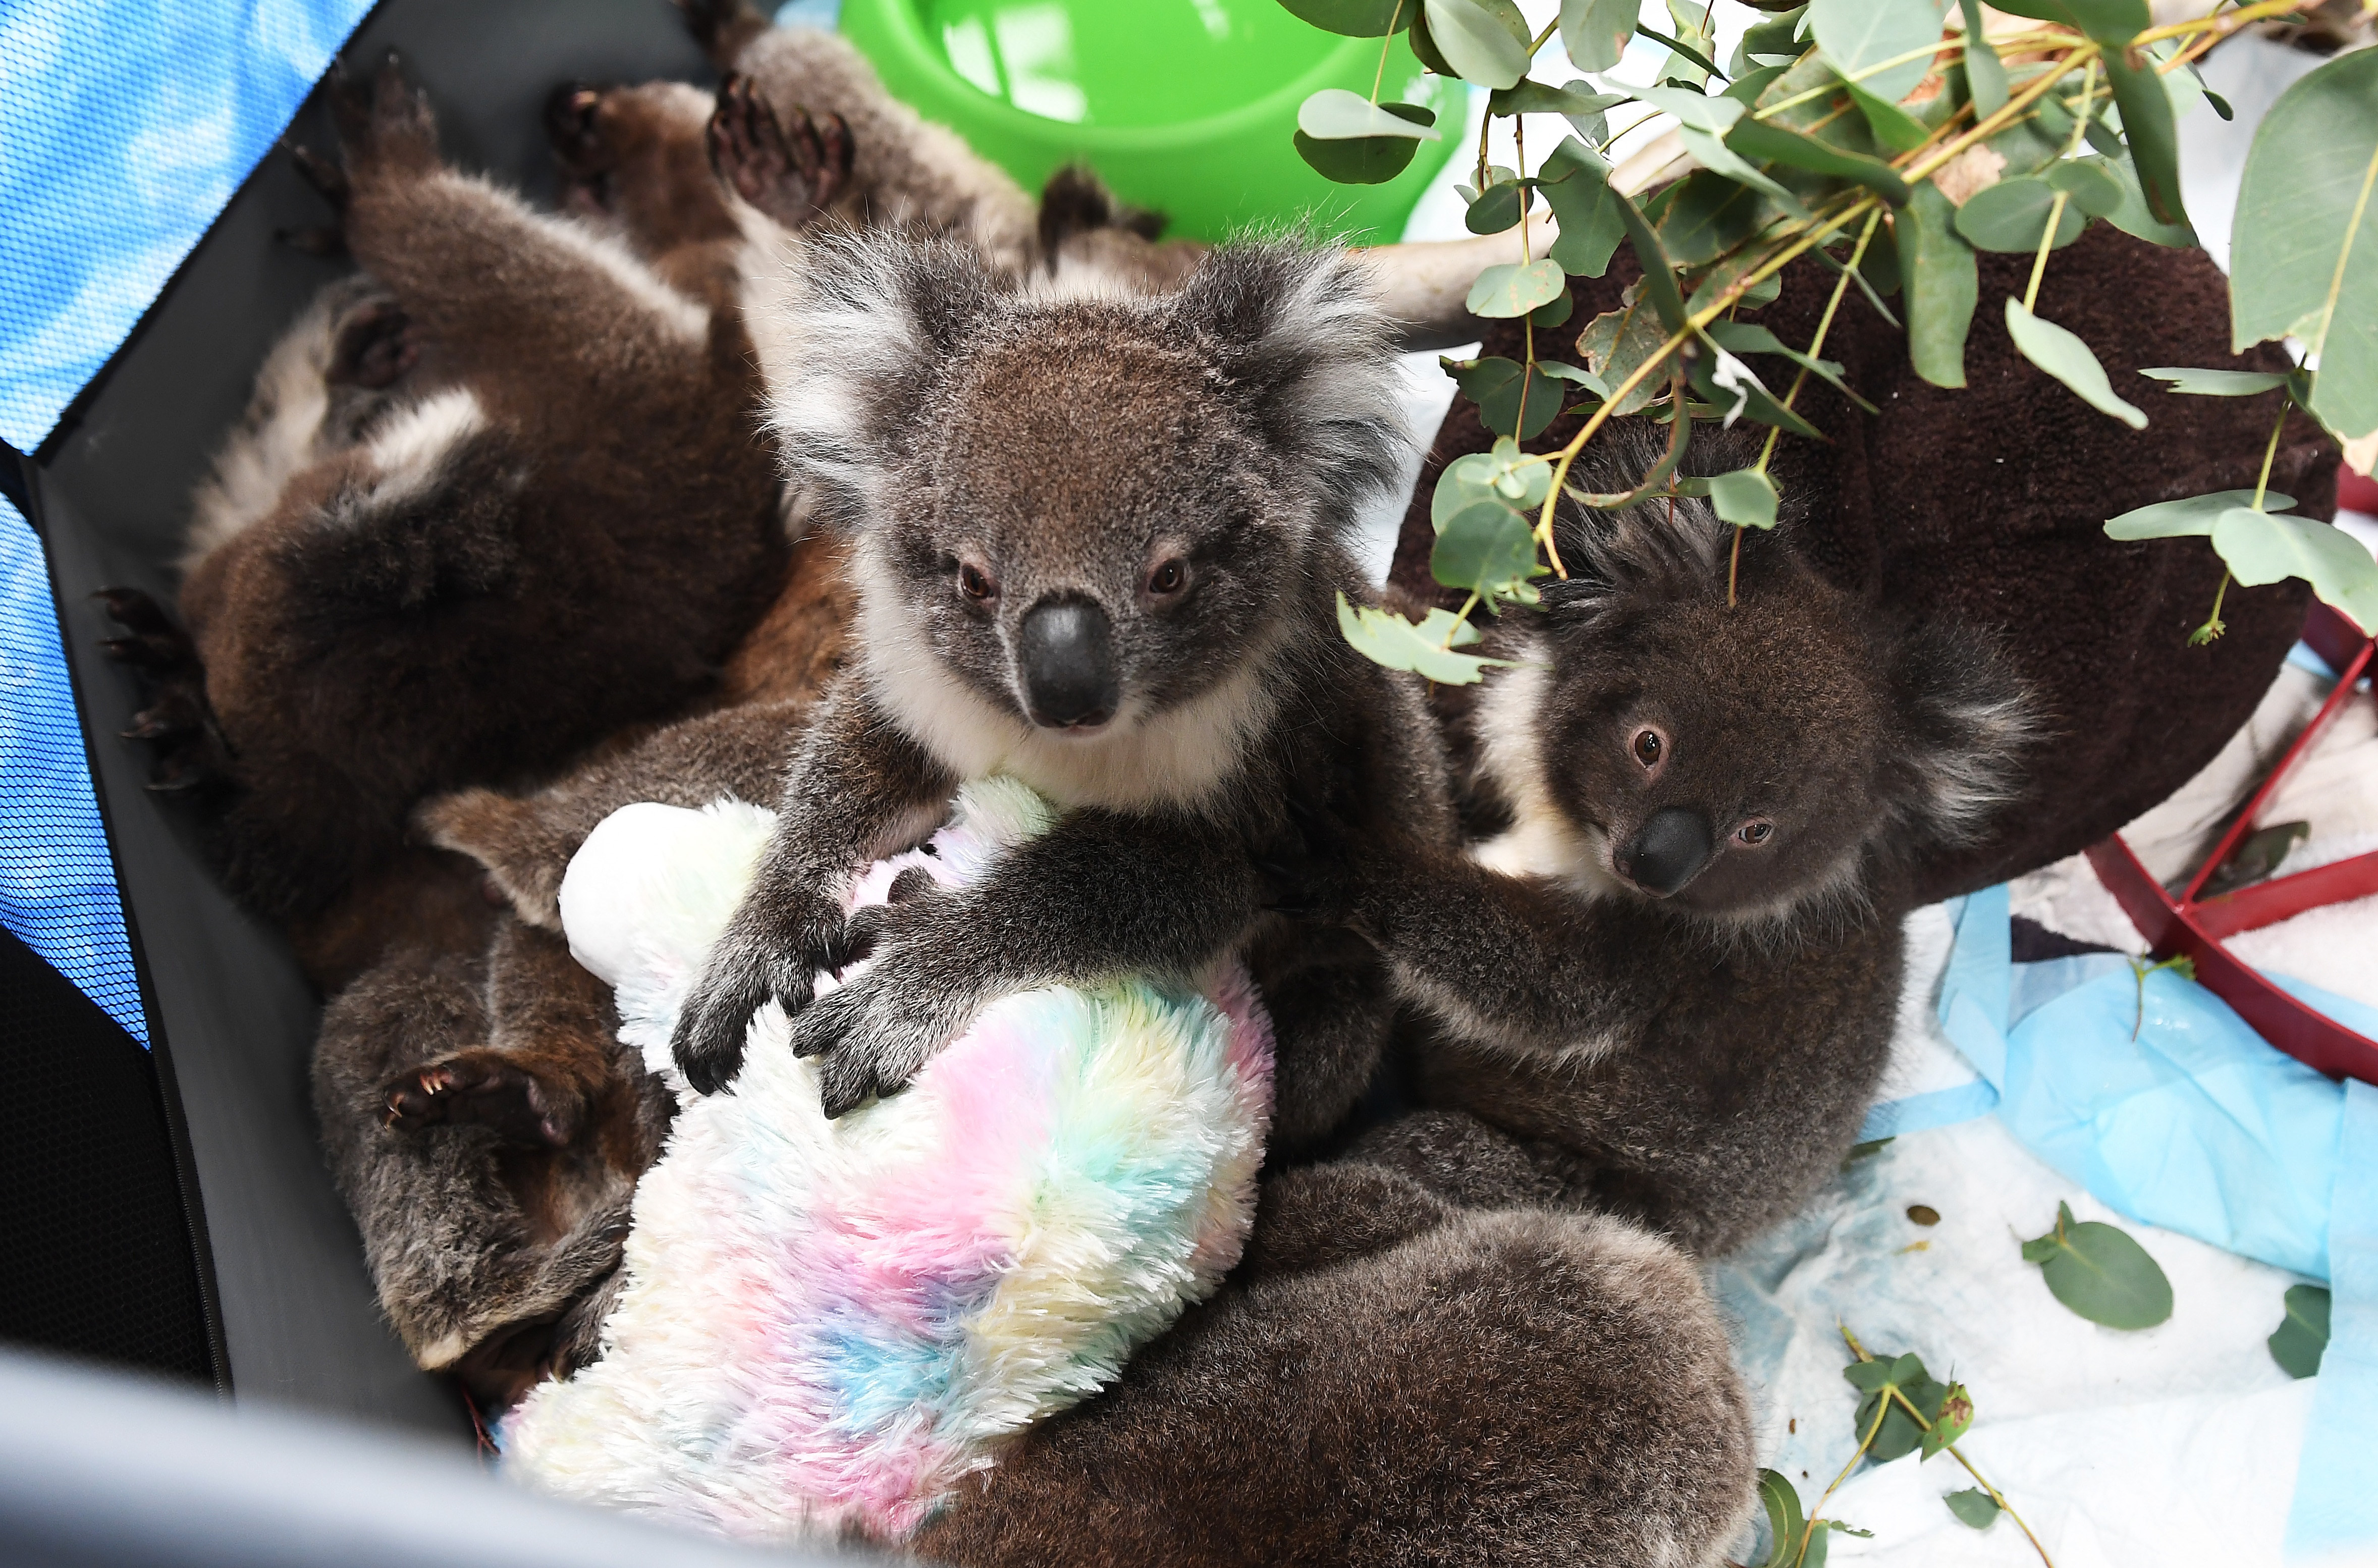 Rescued orphaned baby koals at Adelaide Koala Rescue.